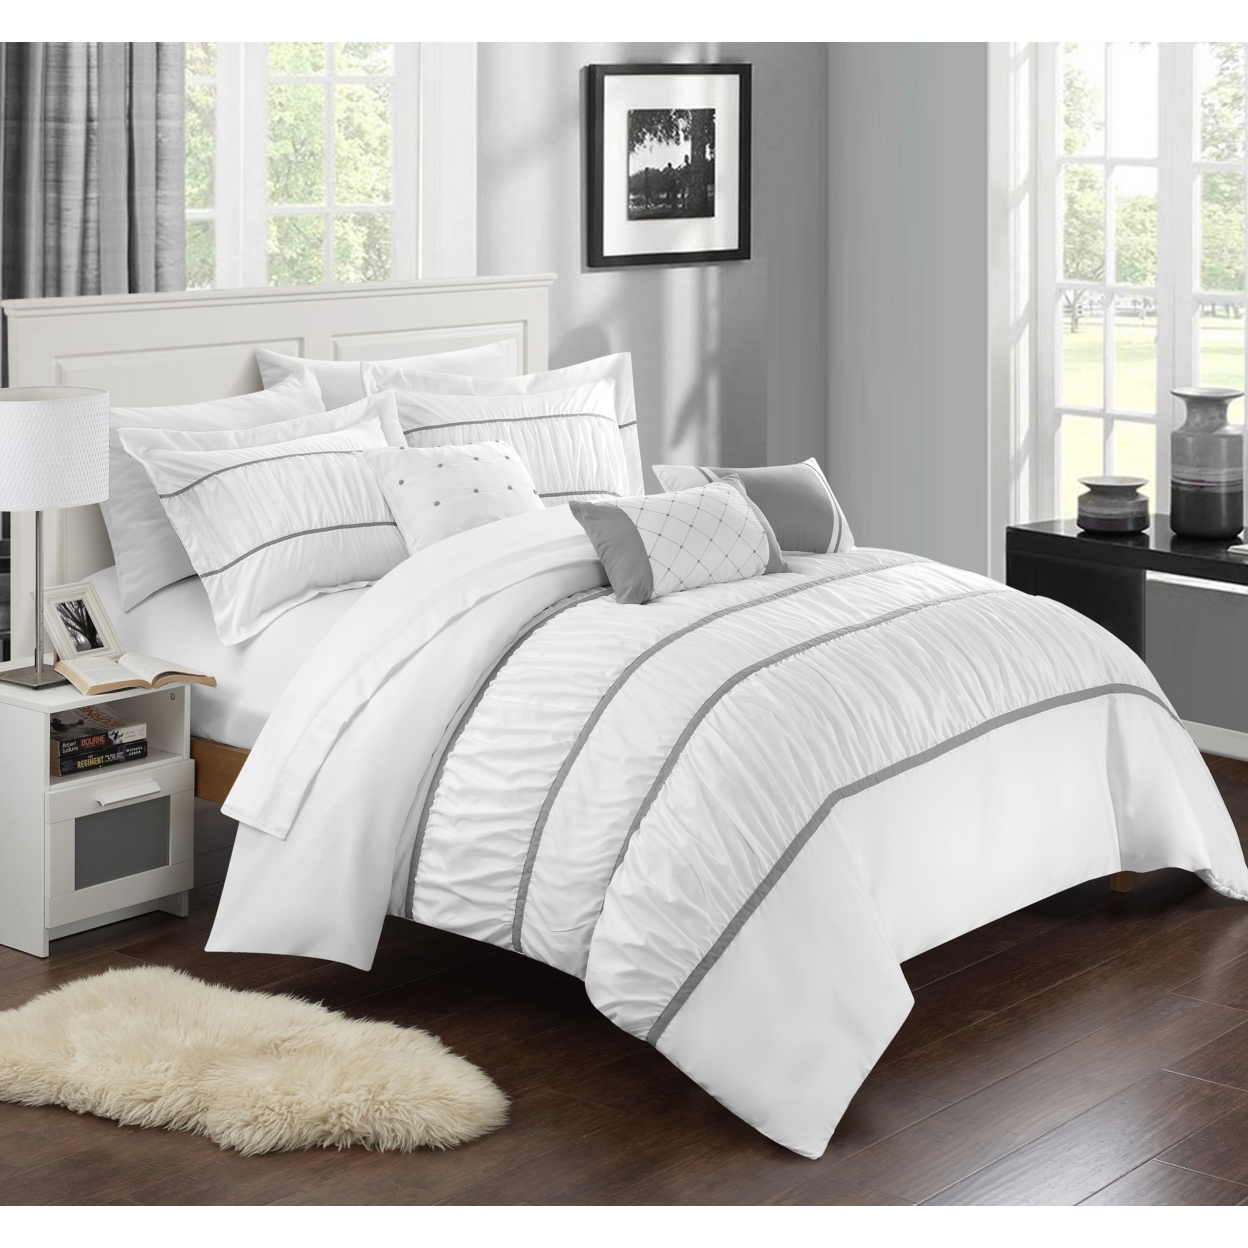 10-Piece Aero Pleated & Ruffled Bed In A Bag Comforter And Sheet Set - White, King